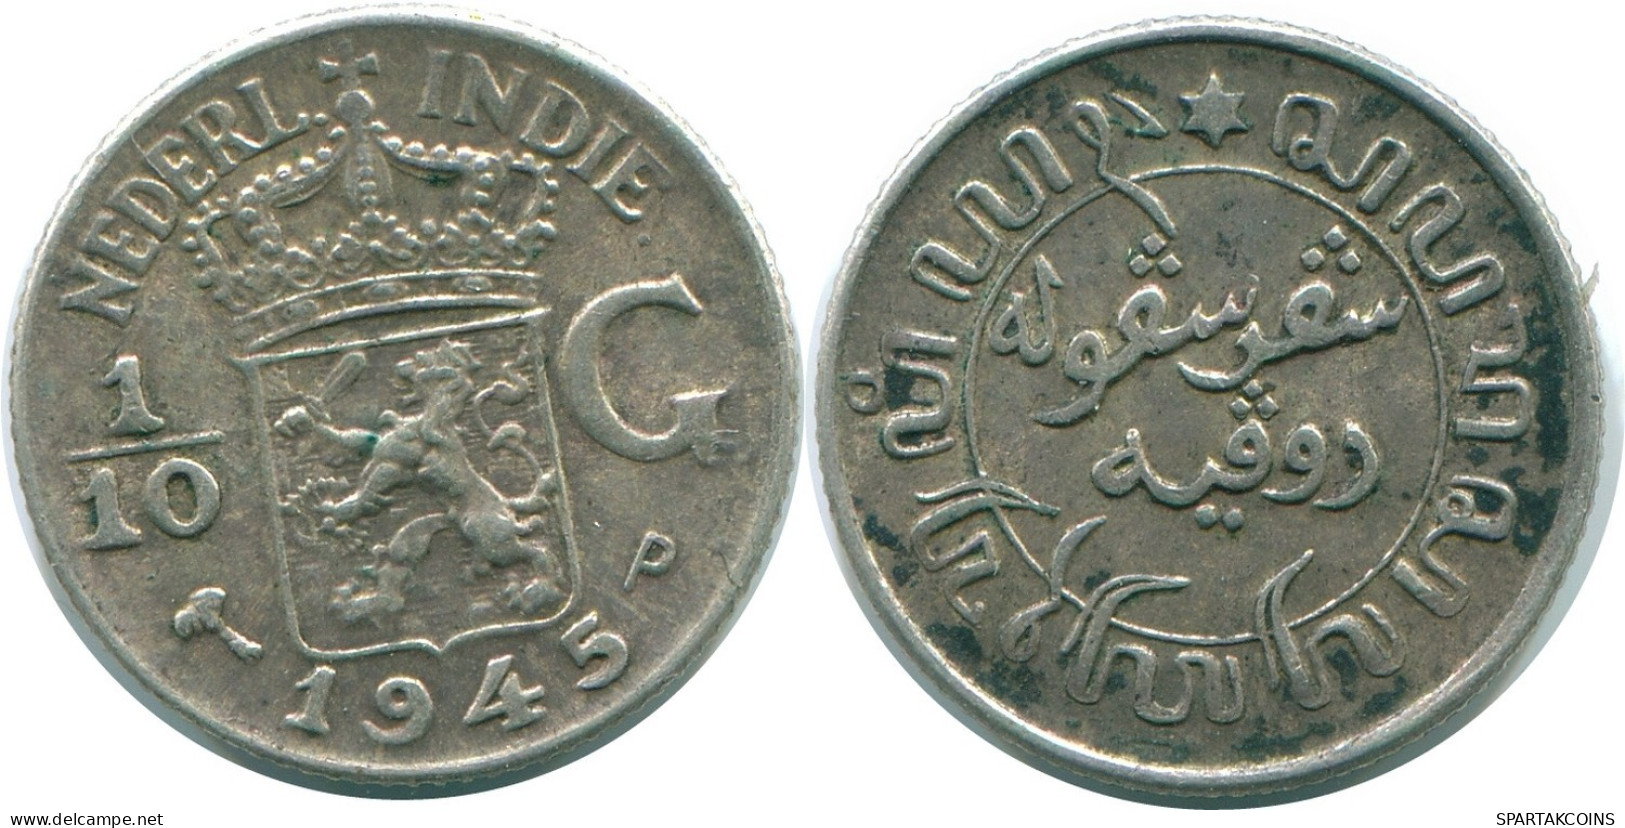 1/10 GULDEN 1945 P NETHERLANDS EAST INDIES SILVER Colonial Coin #NL14194.3.U.A - Indes Neerlandesas